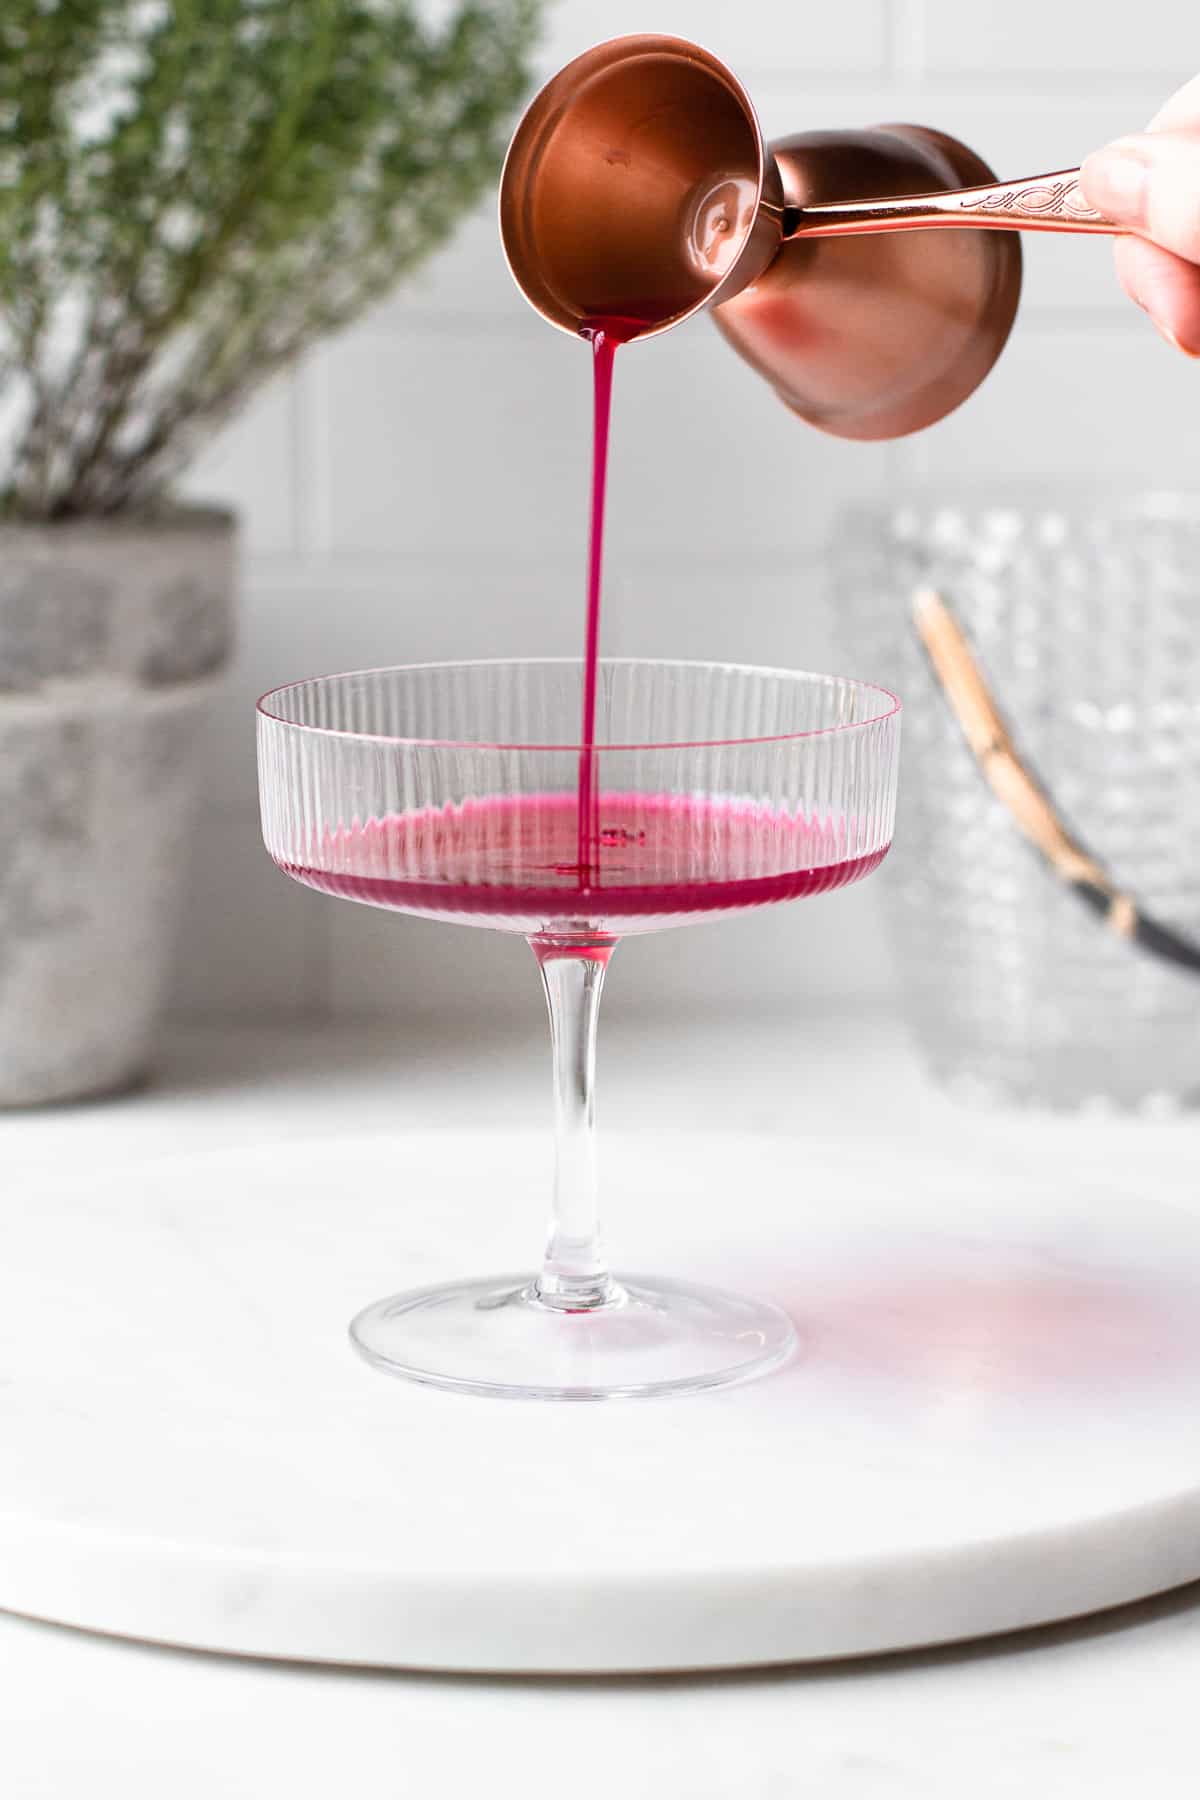 Hand pouring purple pomegranate juice into a coupe glass.